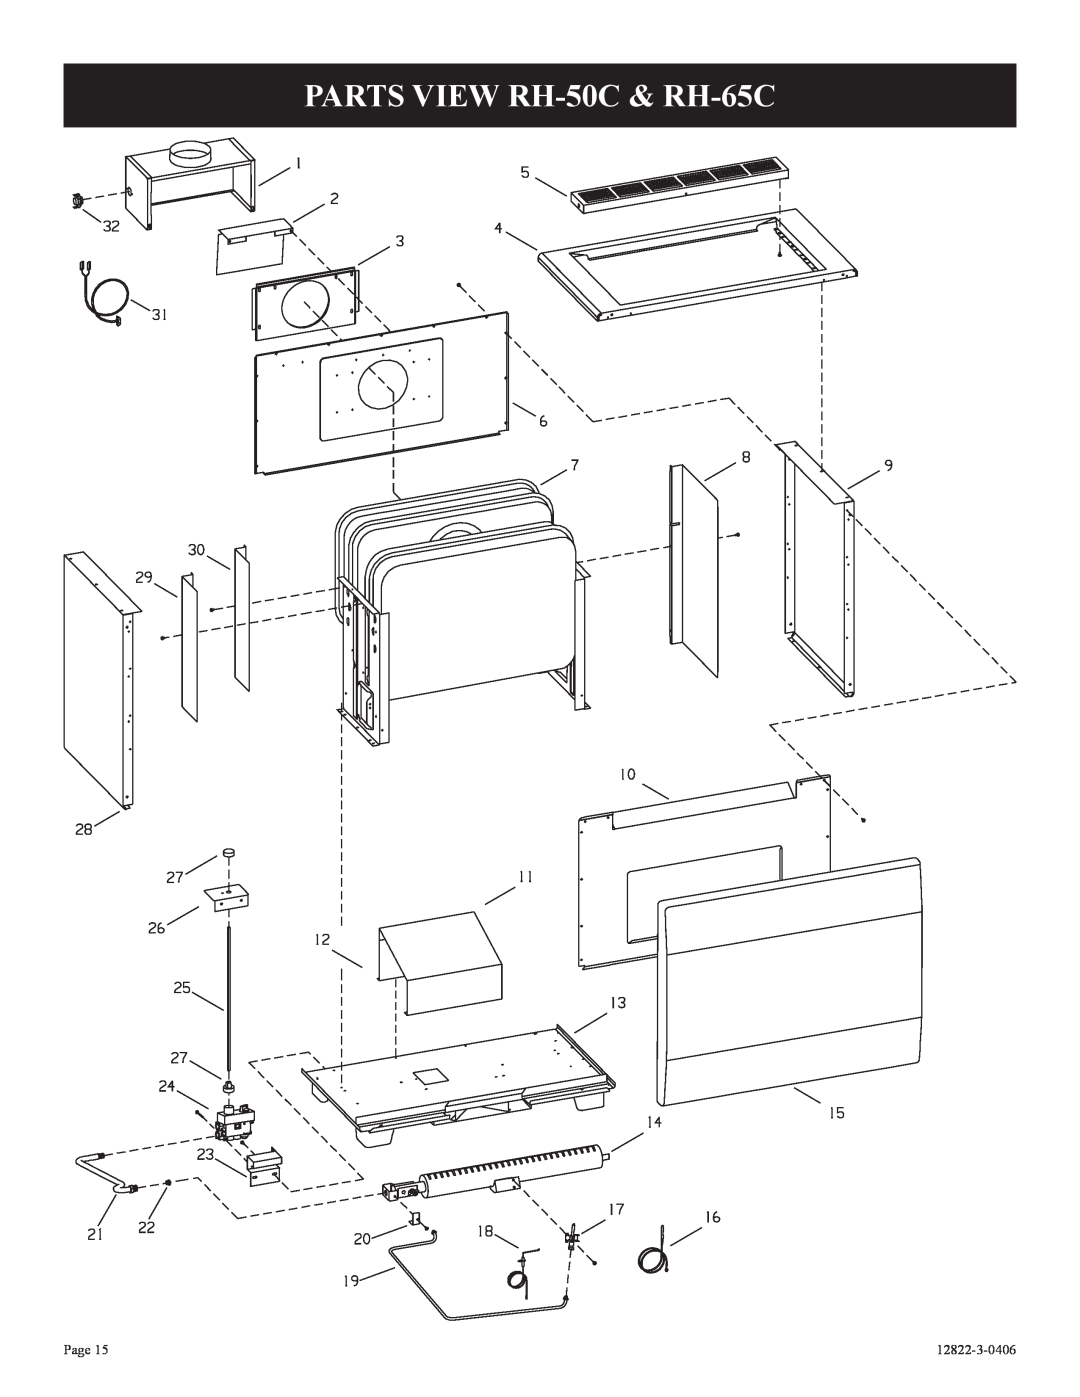 Empire Products RH-50-6 installation instructions PARTS VIEW RH-50C& RH-65C, Page, 12822-3-0406 